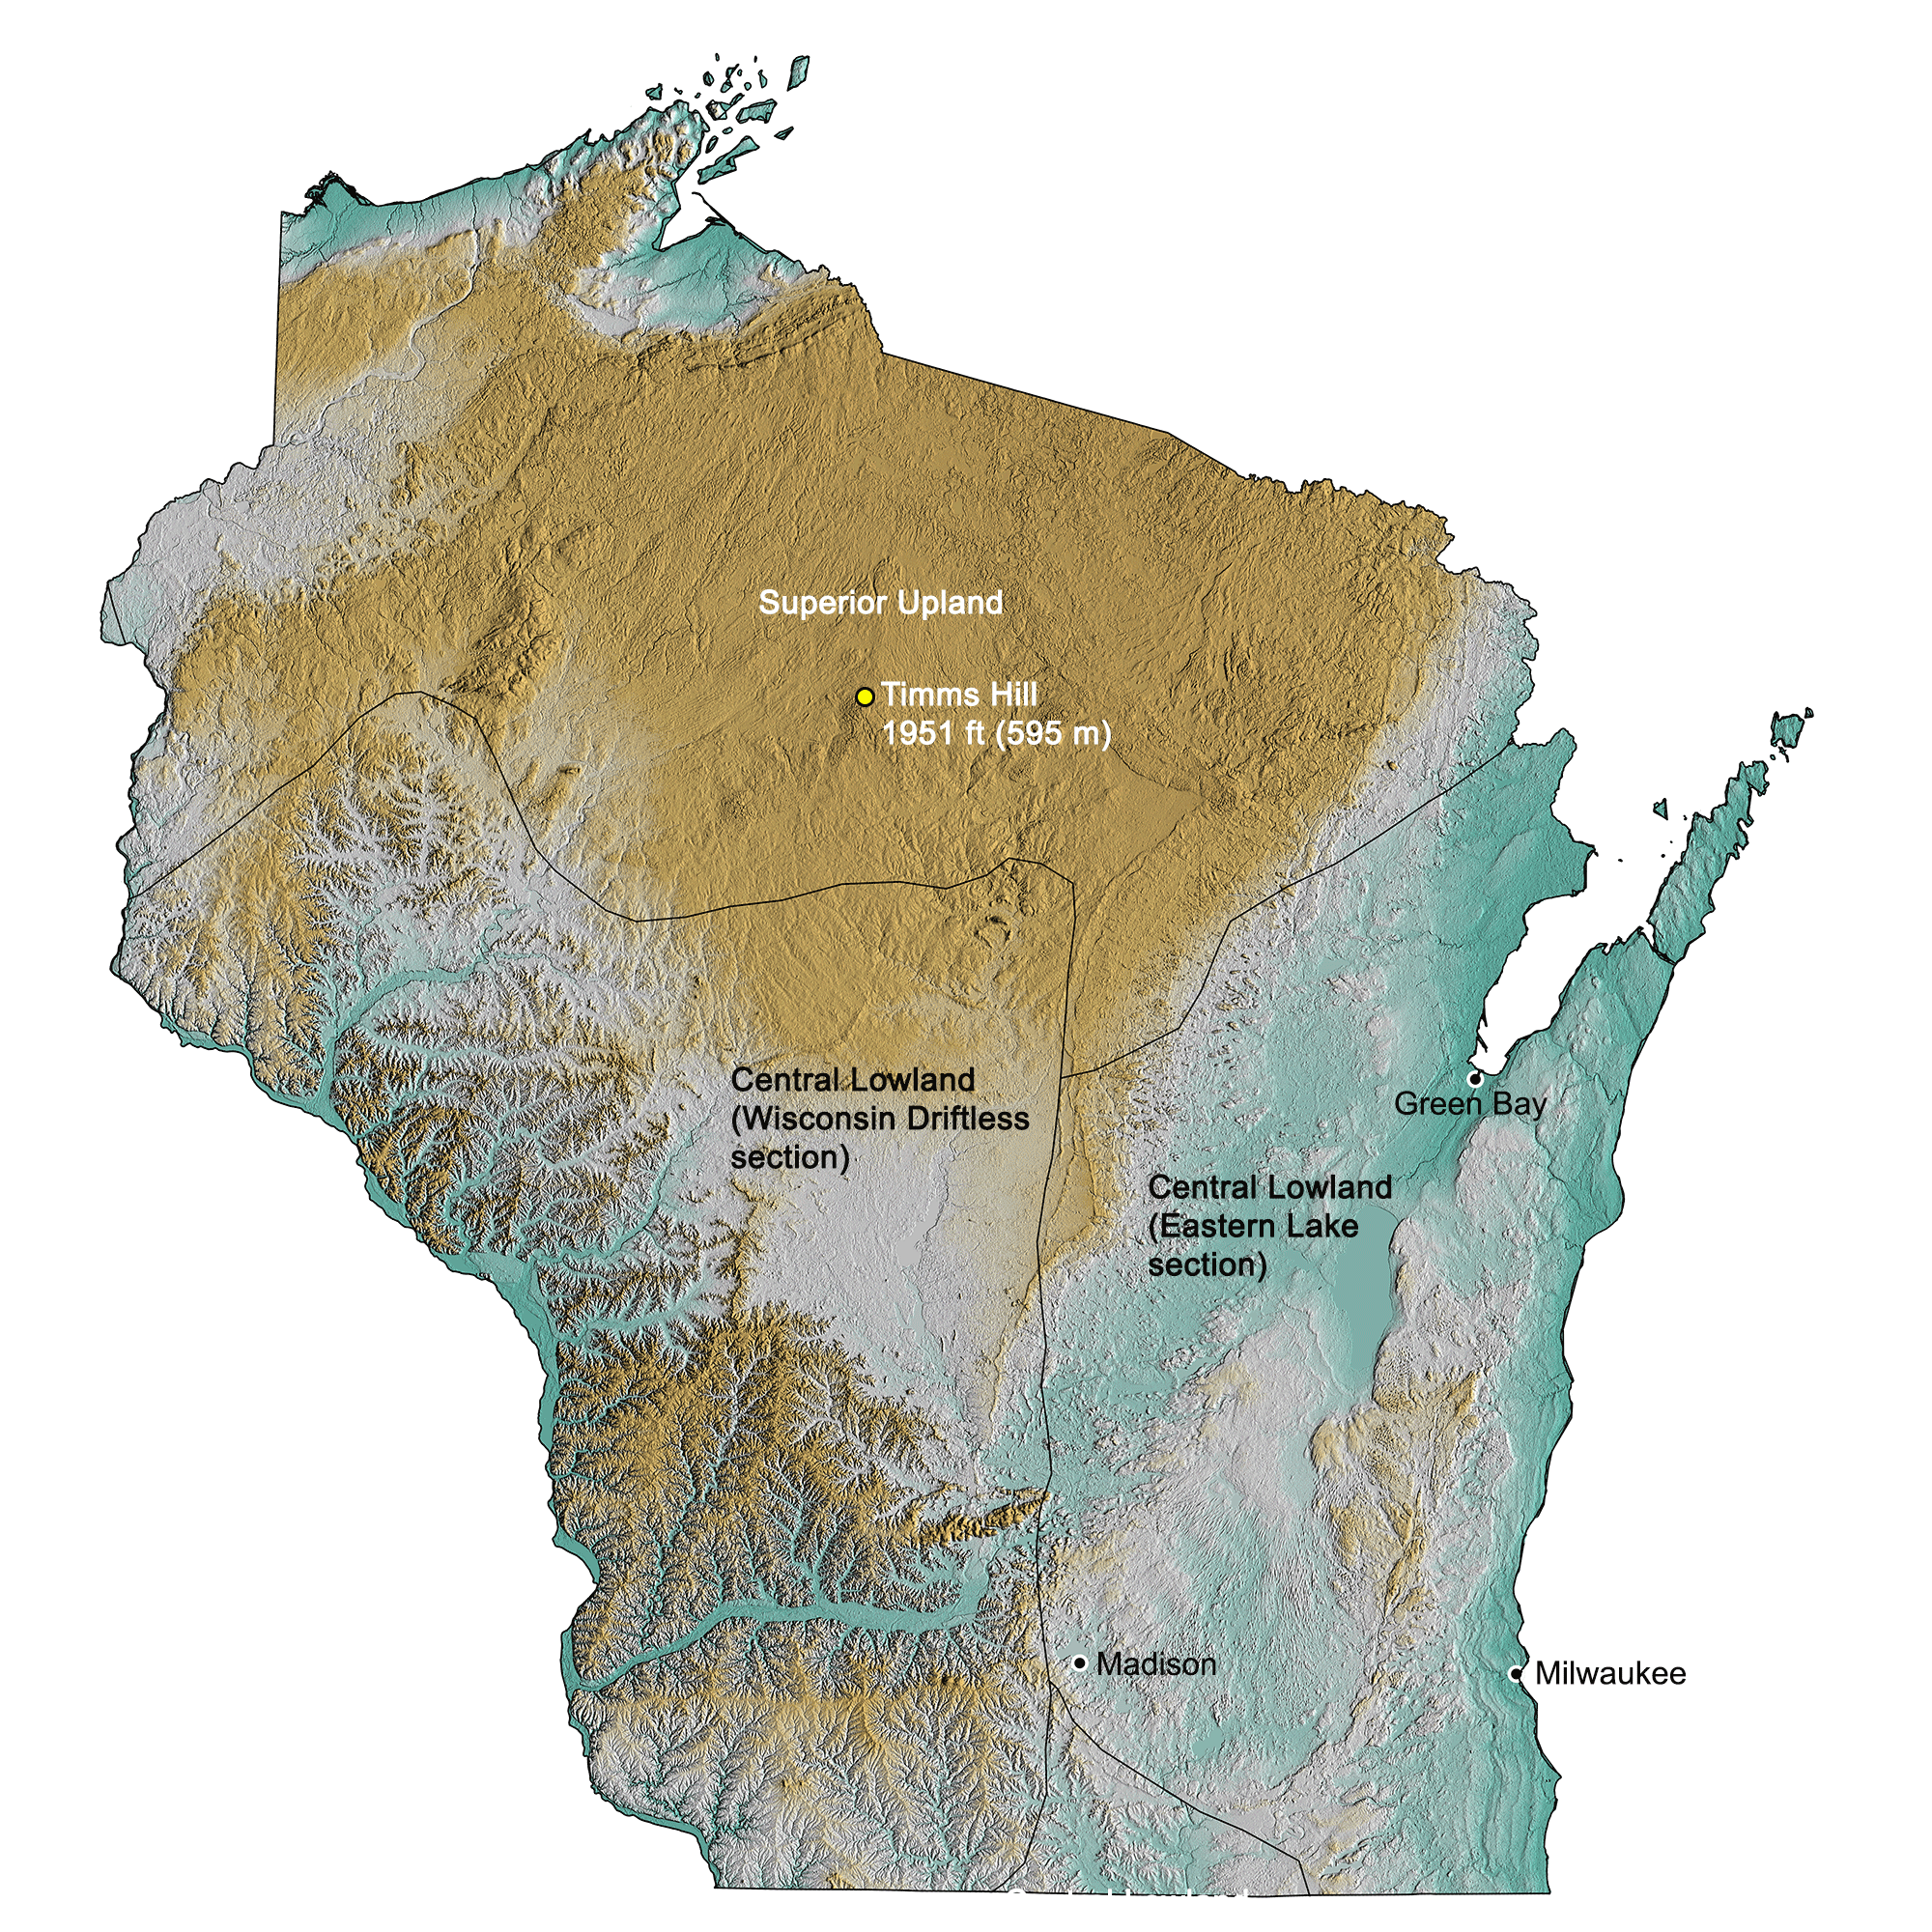 Topographic map of Wisconsin.